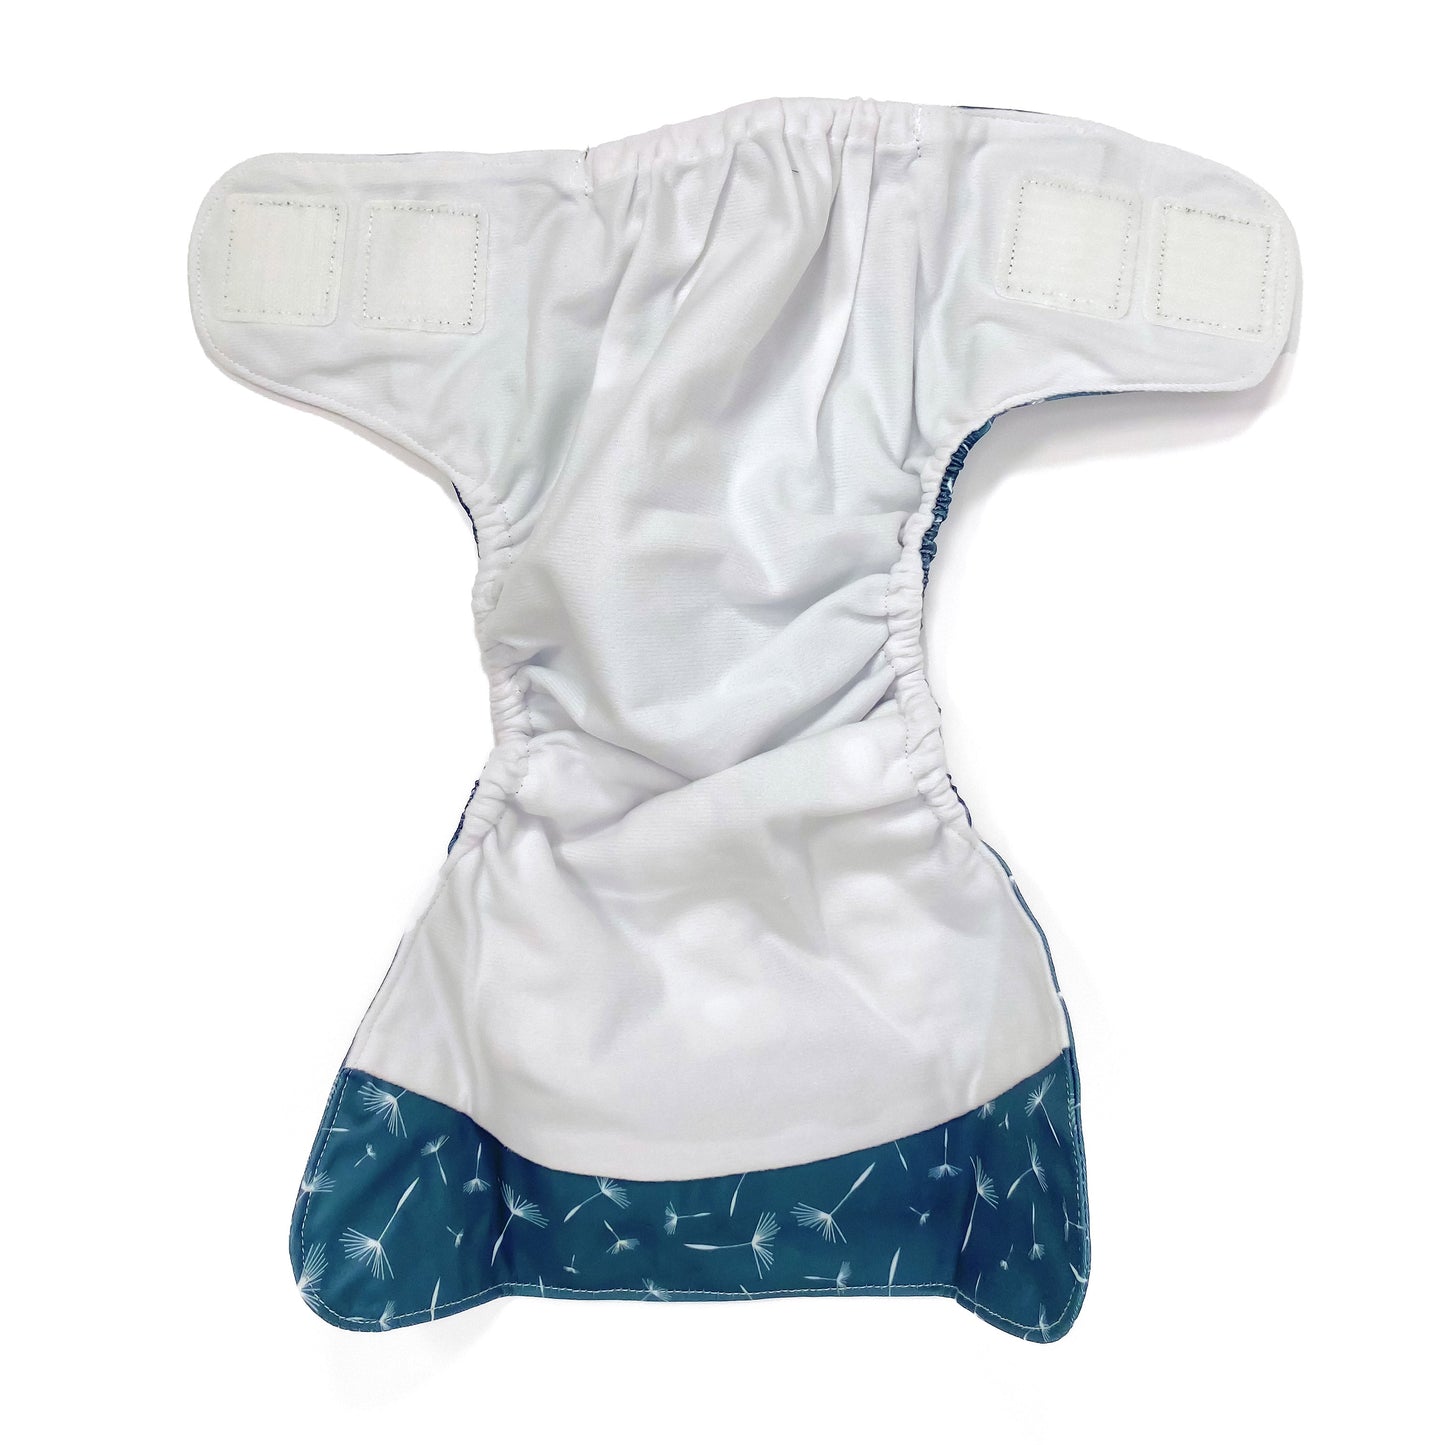 An adjustable reusable nappy for babies and toddlers, featuring a midnight breeze design, with images of dandelion seeds on a navy blue background. View shows the inside fabric of the nappy.